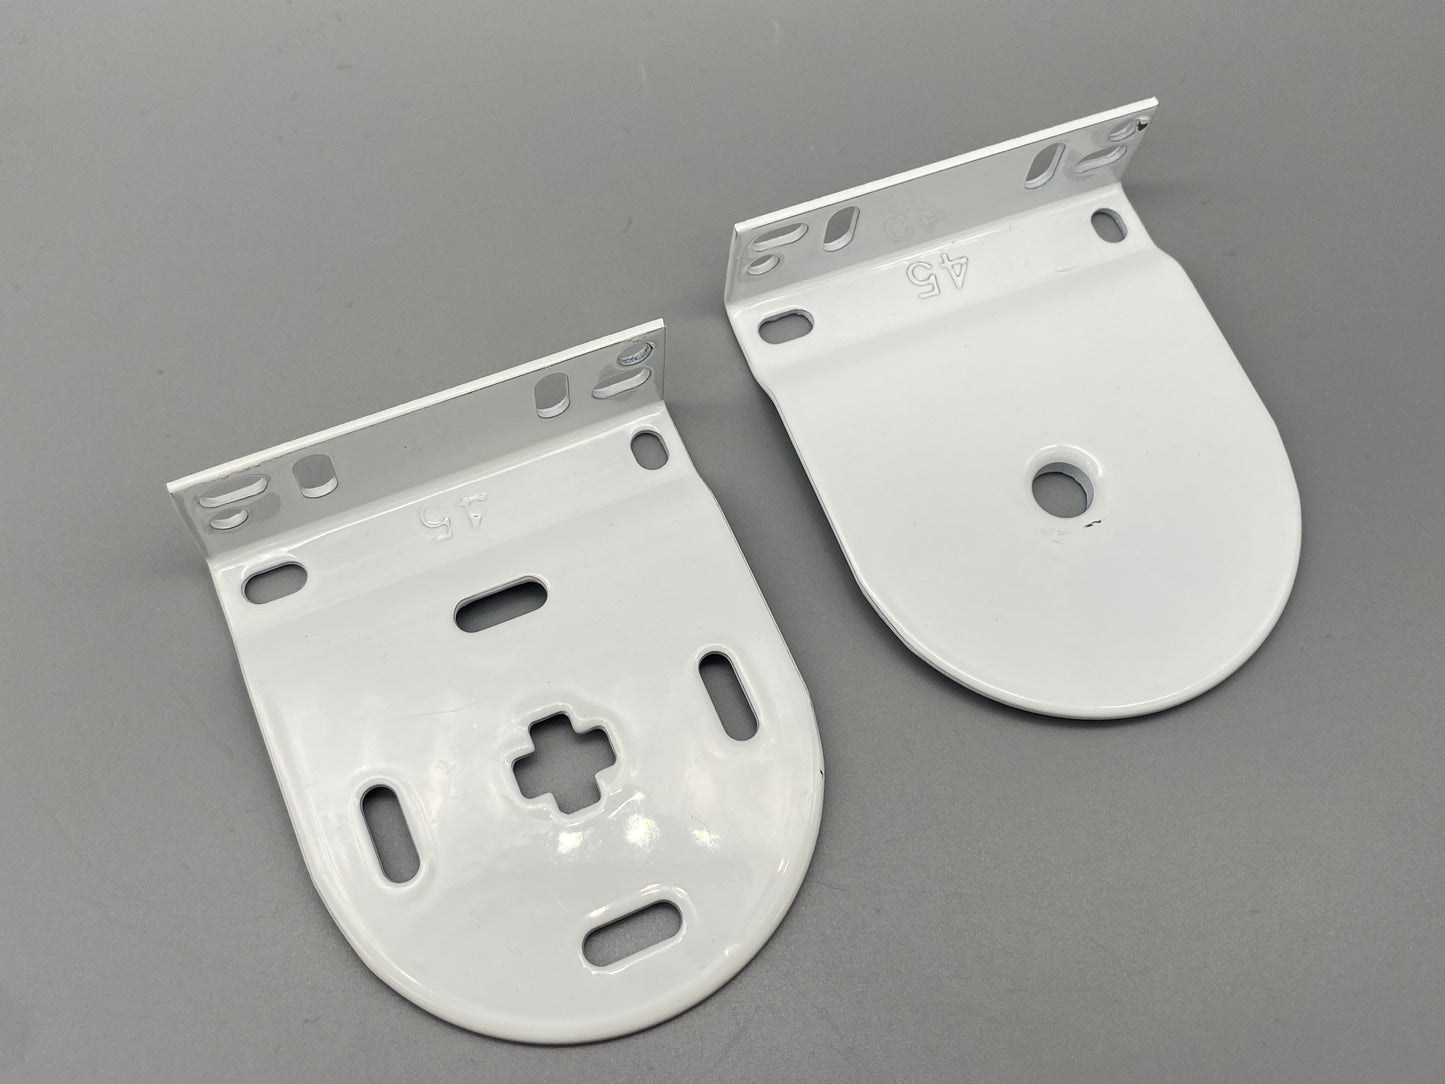 Pair of Replacement Roller Blinds Brackets Set - Metal Brackets - for 45mm System